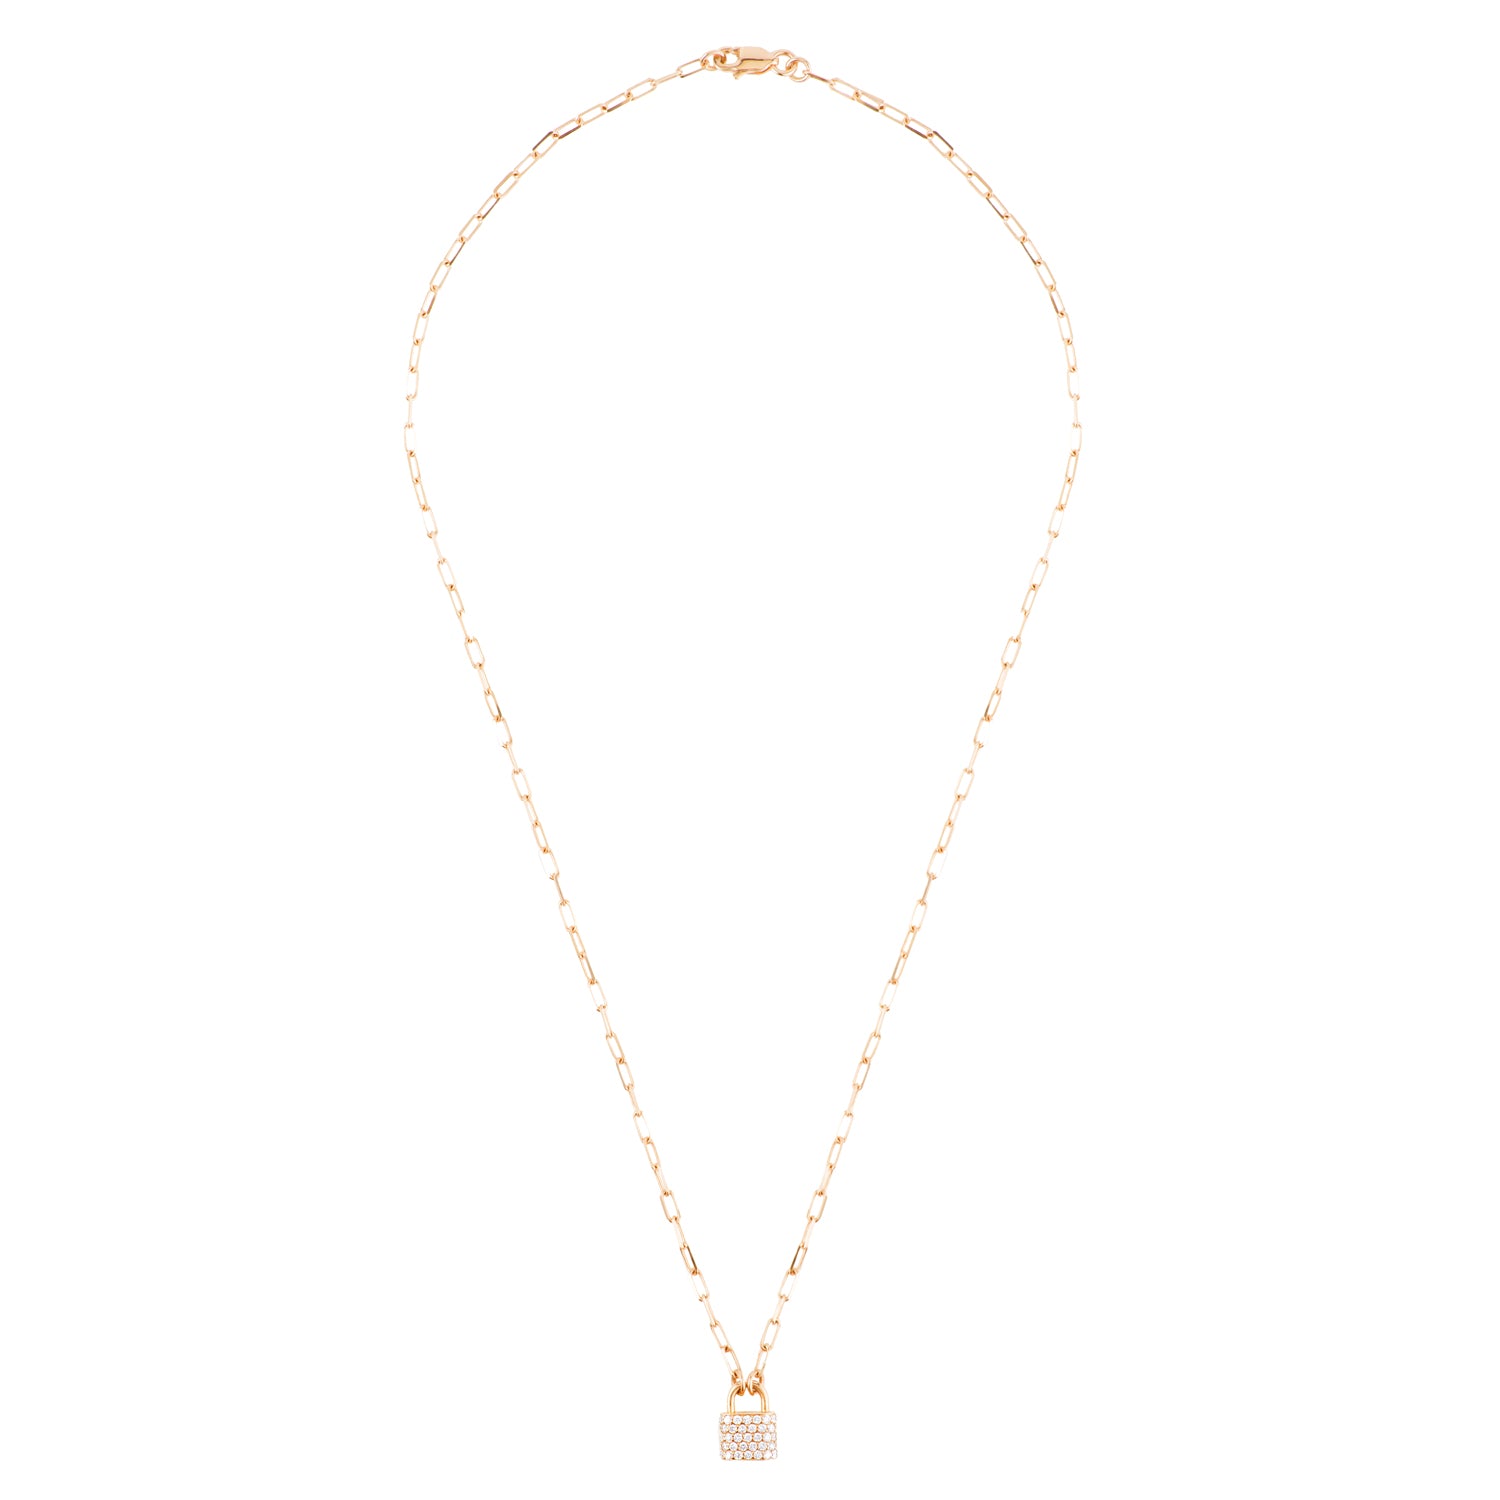 Park Lane CHARMED NECKLACE - 2 in 1 - Orig $136 - Crystals, Lock, Key,  Pearl +